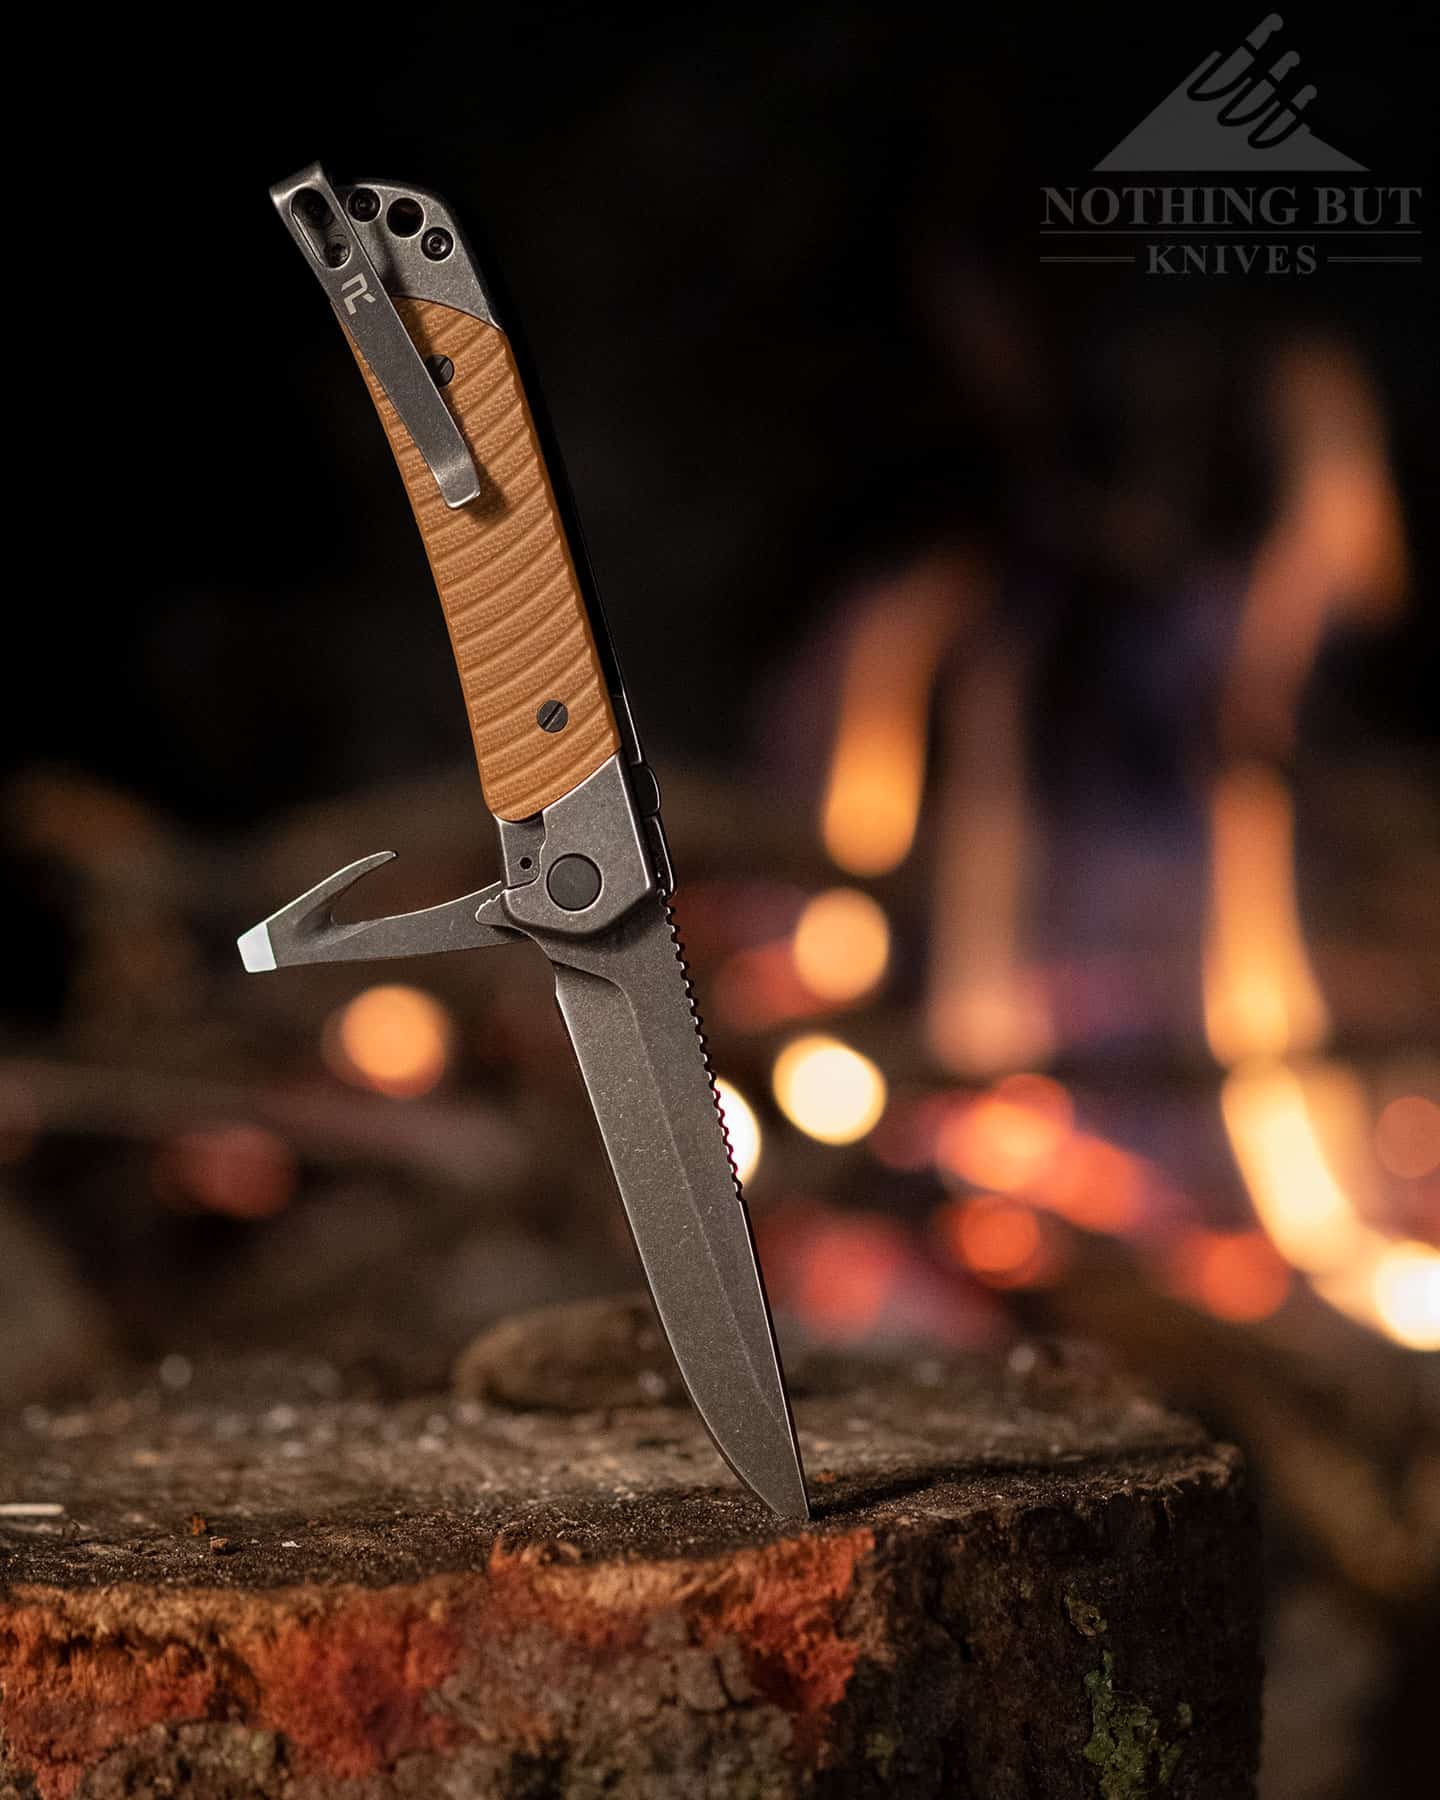 The Revo Duo won a Drunken Hillbilly Award for Best Multitool with a Pocket Clip.